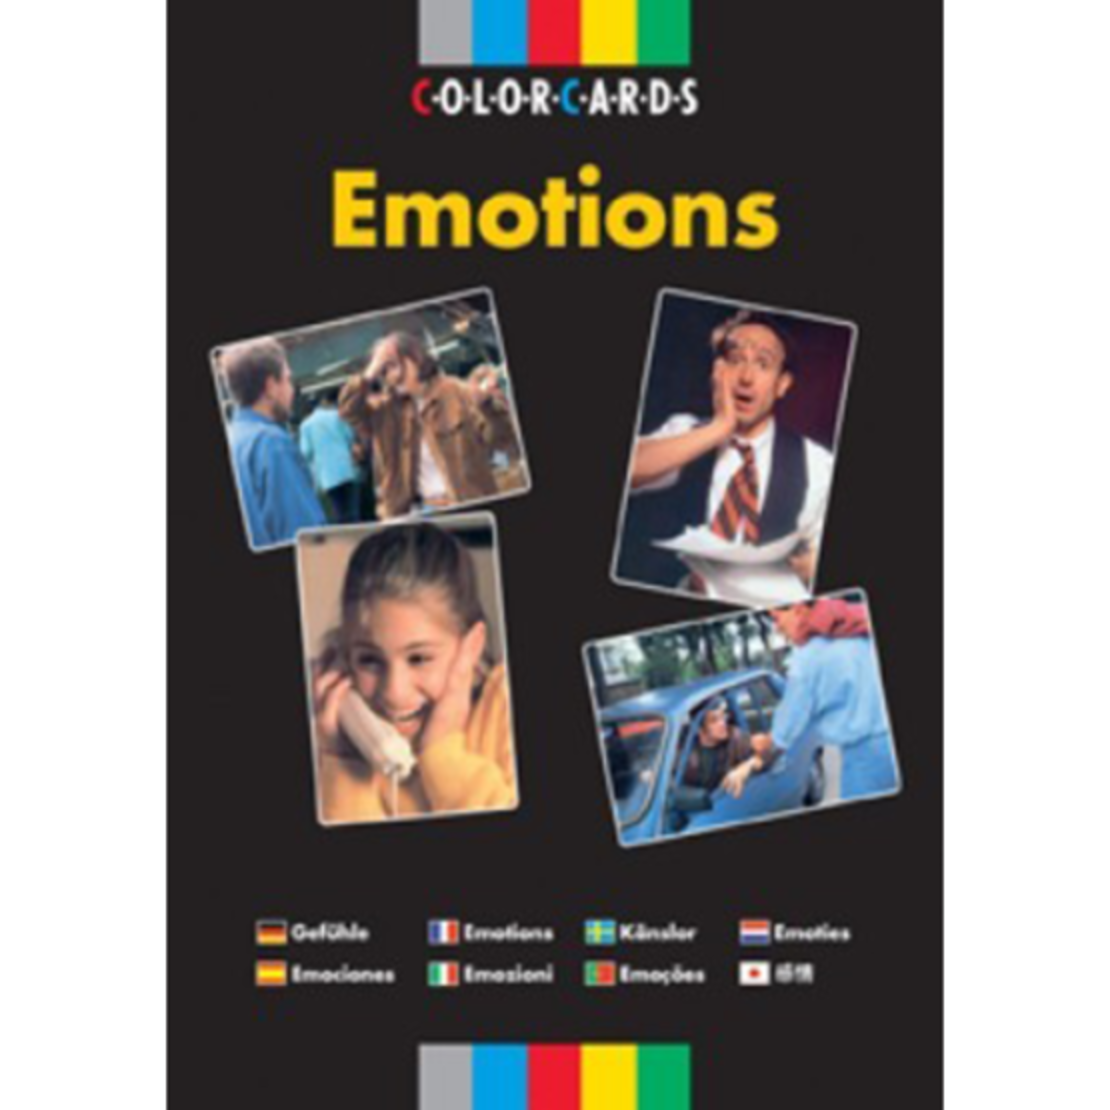 color card's emotions רגשות